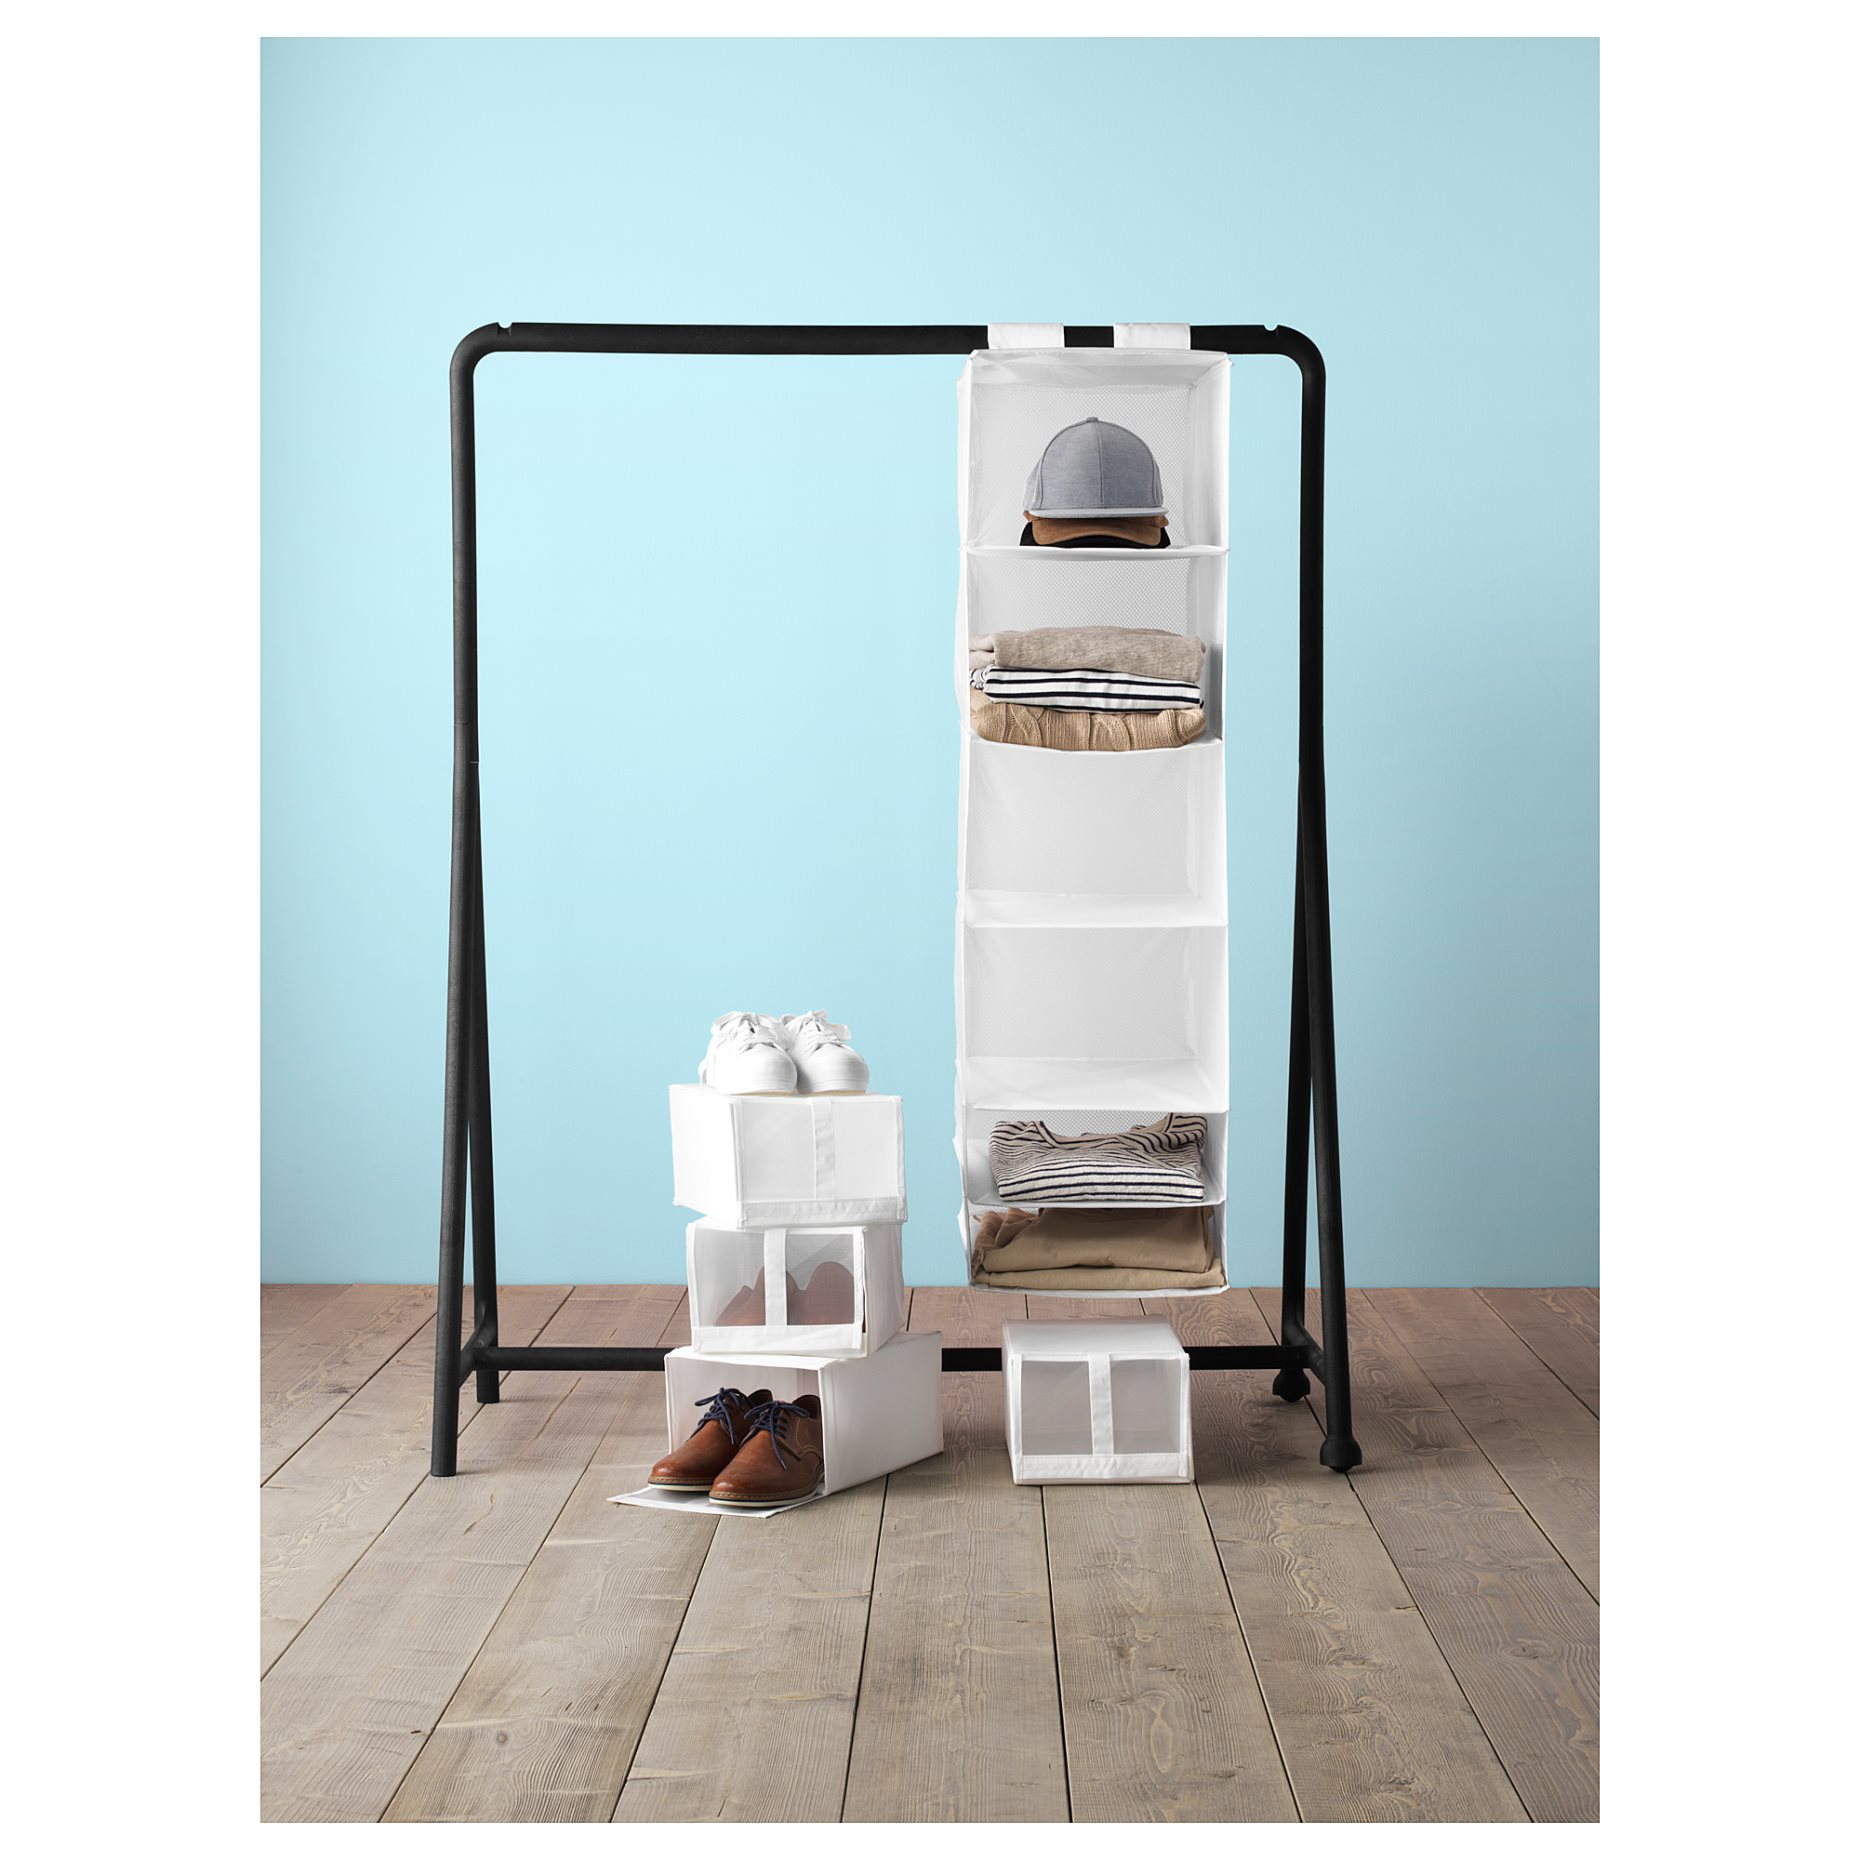 SKUBB, storage with 6 compartments, 002.458.80